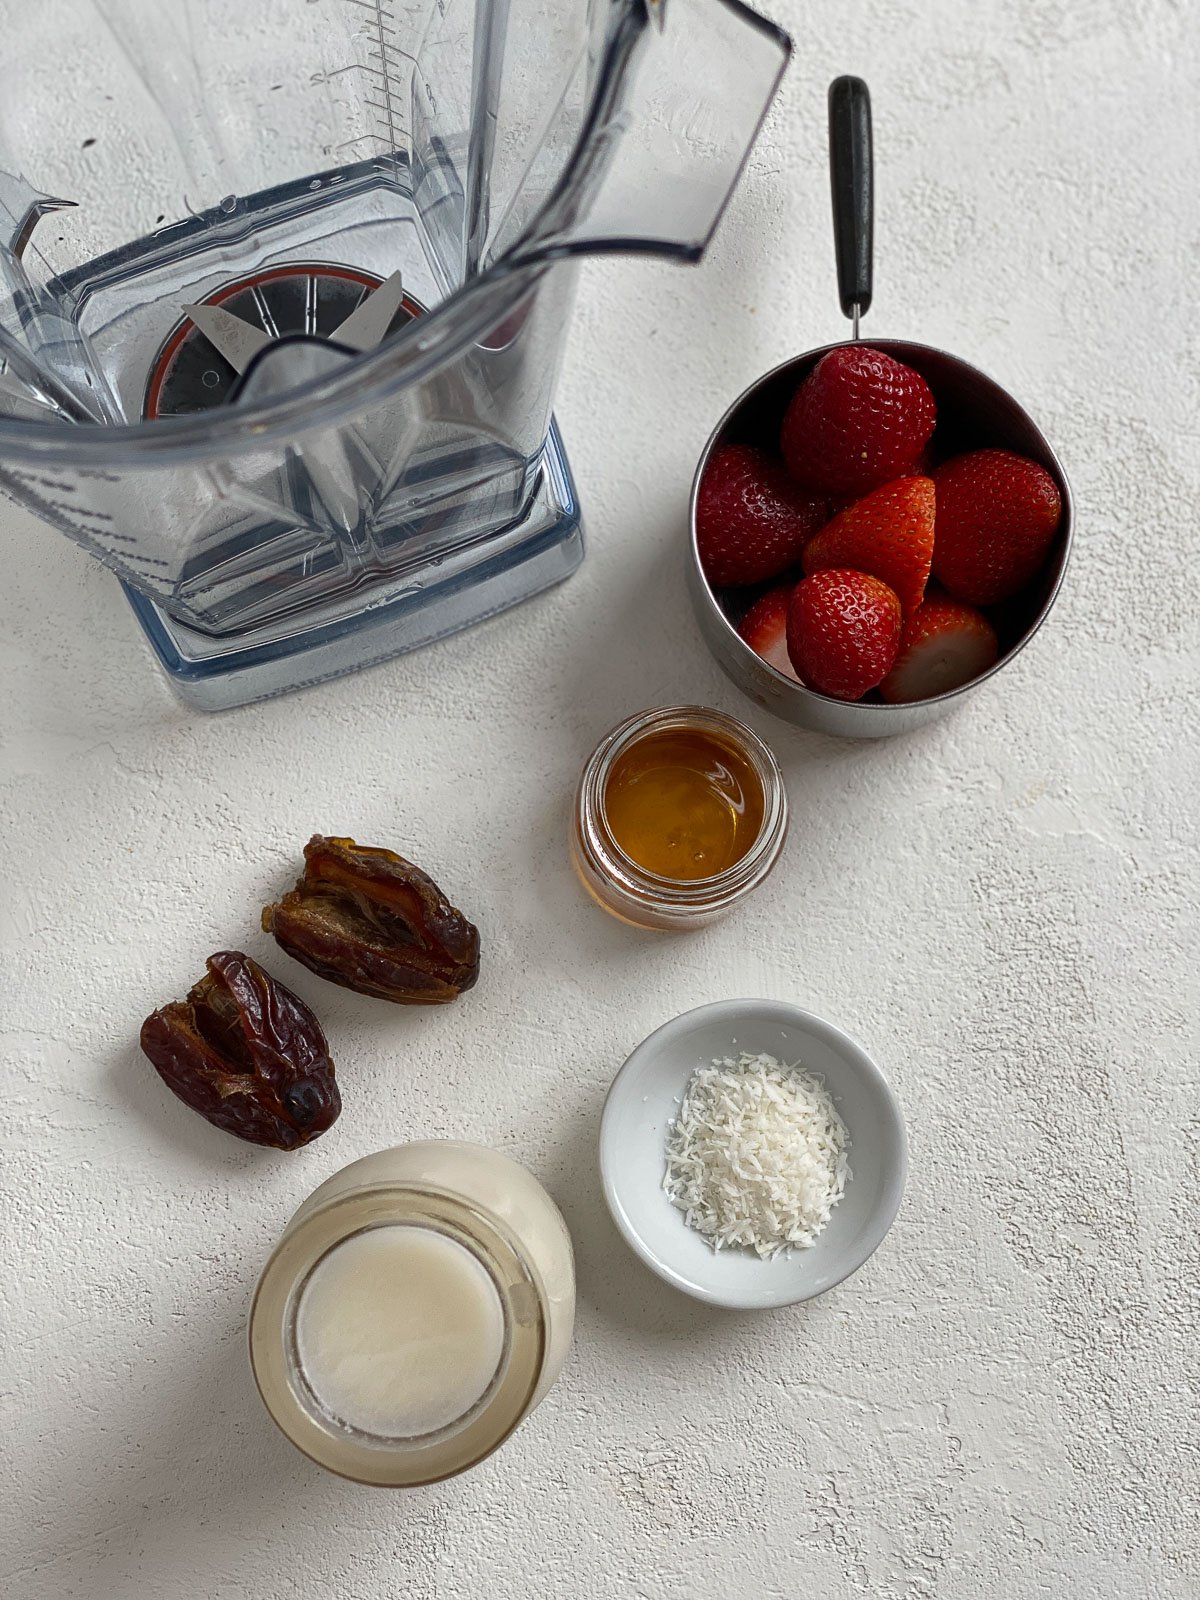 ingredients for Vegan Strawberry Overnight Oats against a white surface